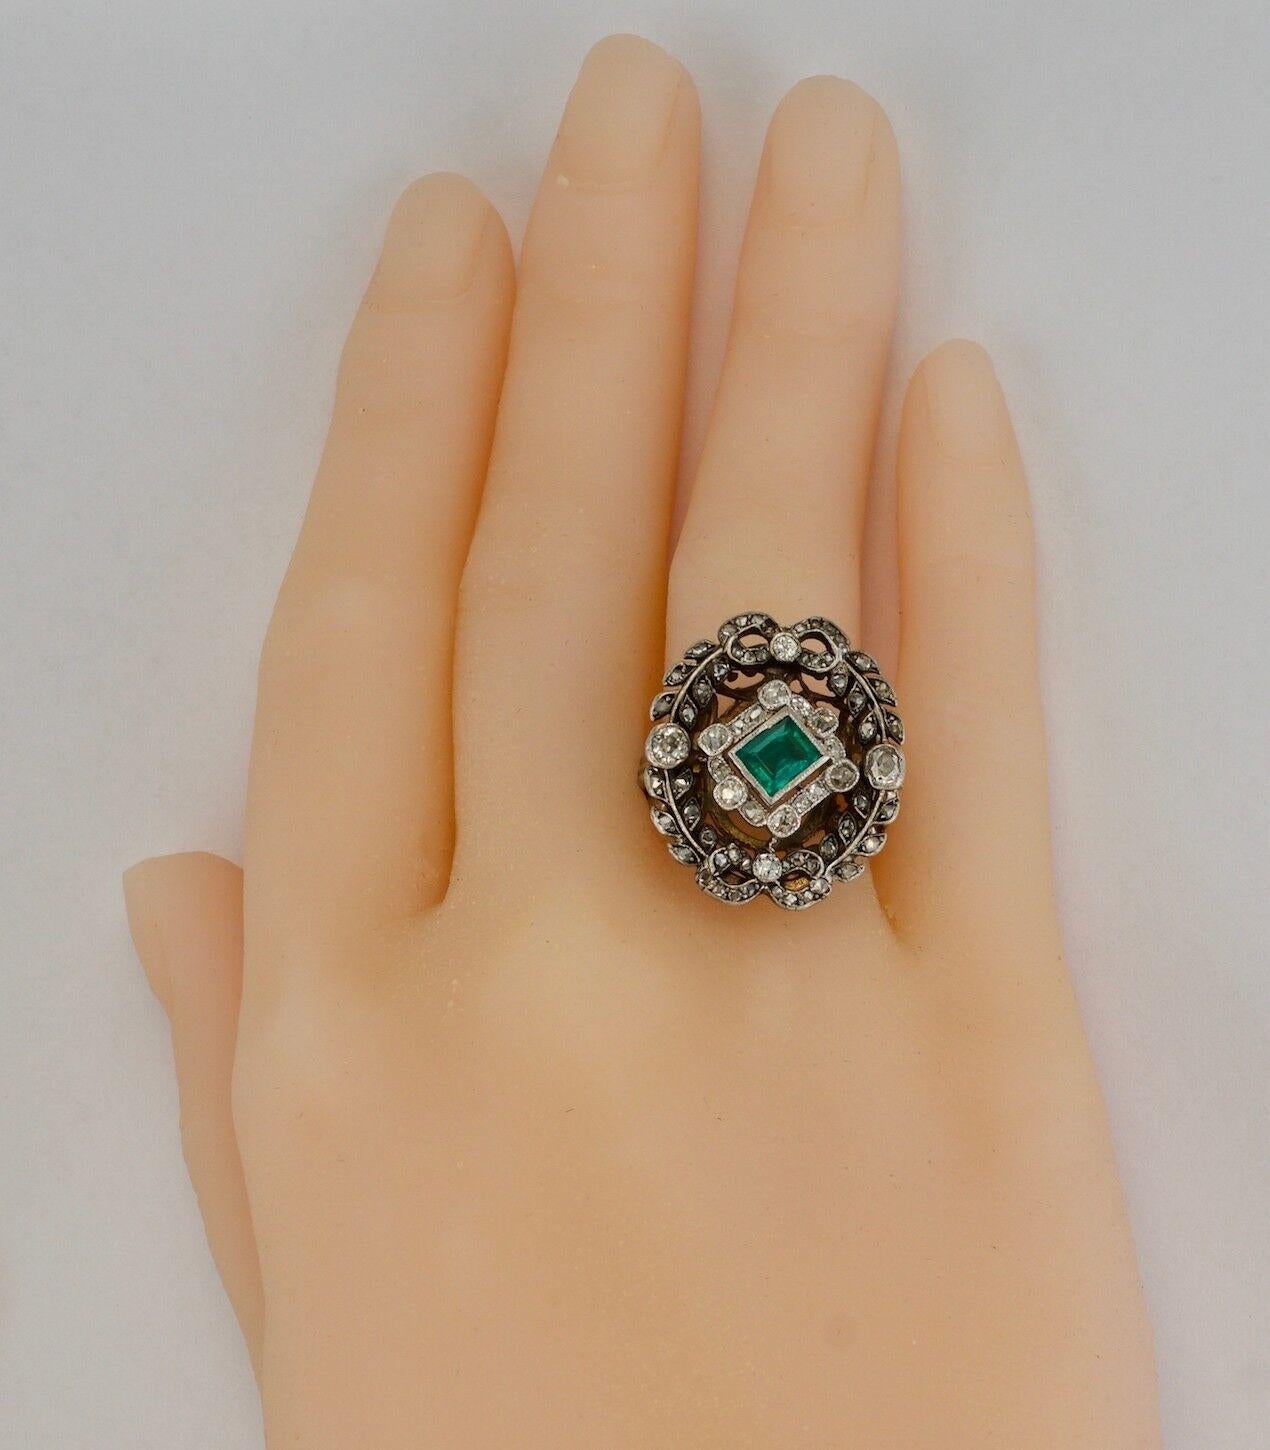 Diamond Emerald Ring 14K White Gold Antique Cocktail Victorian In Good Condition For Sale In East Brunswick, NJ